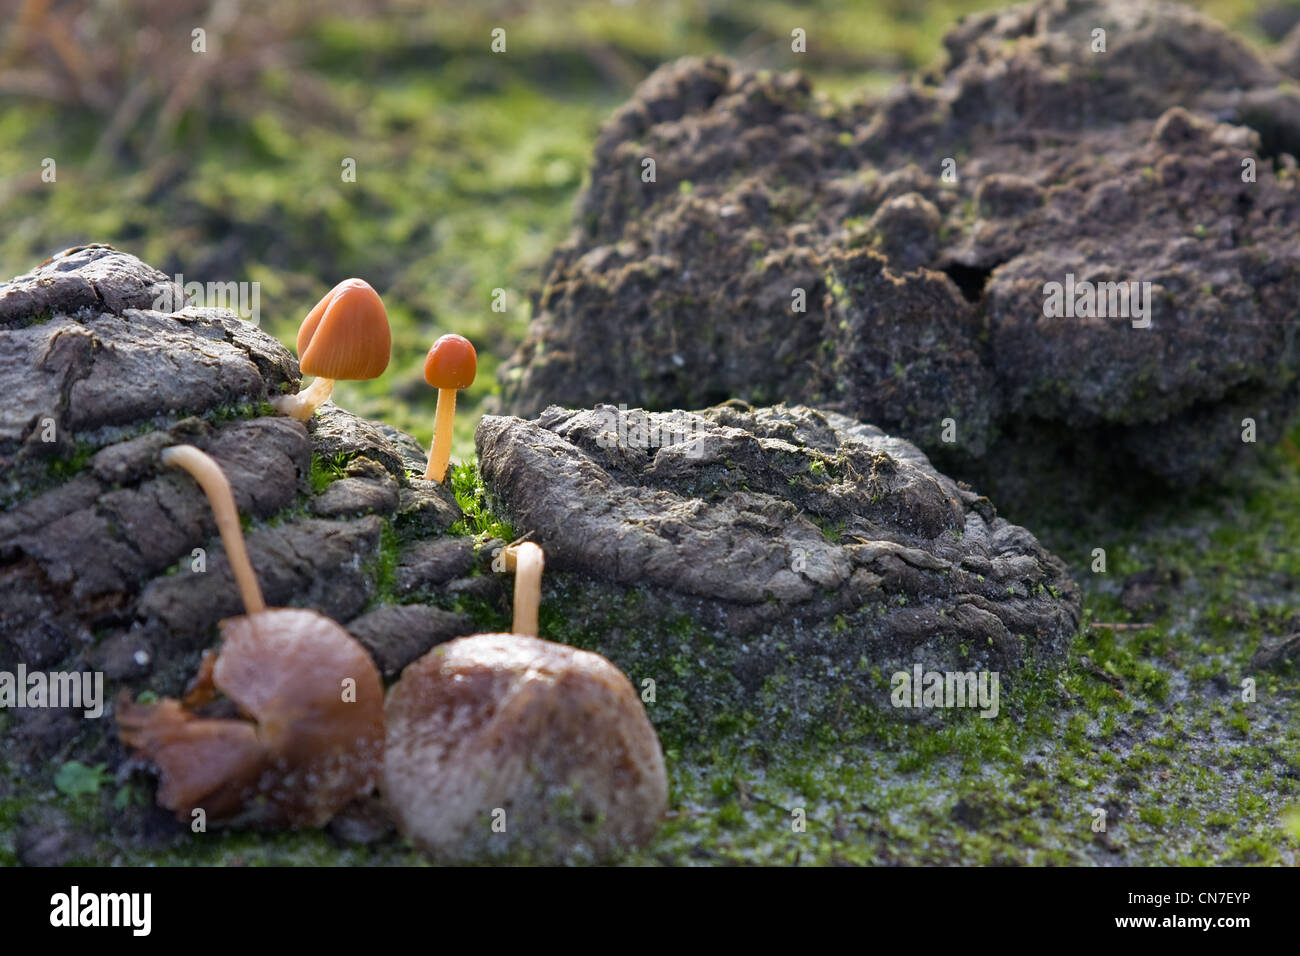 Yellow Cowpat Toadstool (Bolbitius vitellinus), a small, edible toadstool, growing on or near dung. Stock Photo